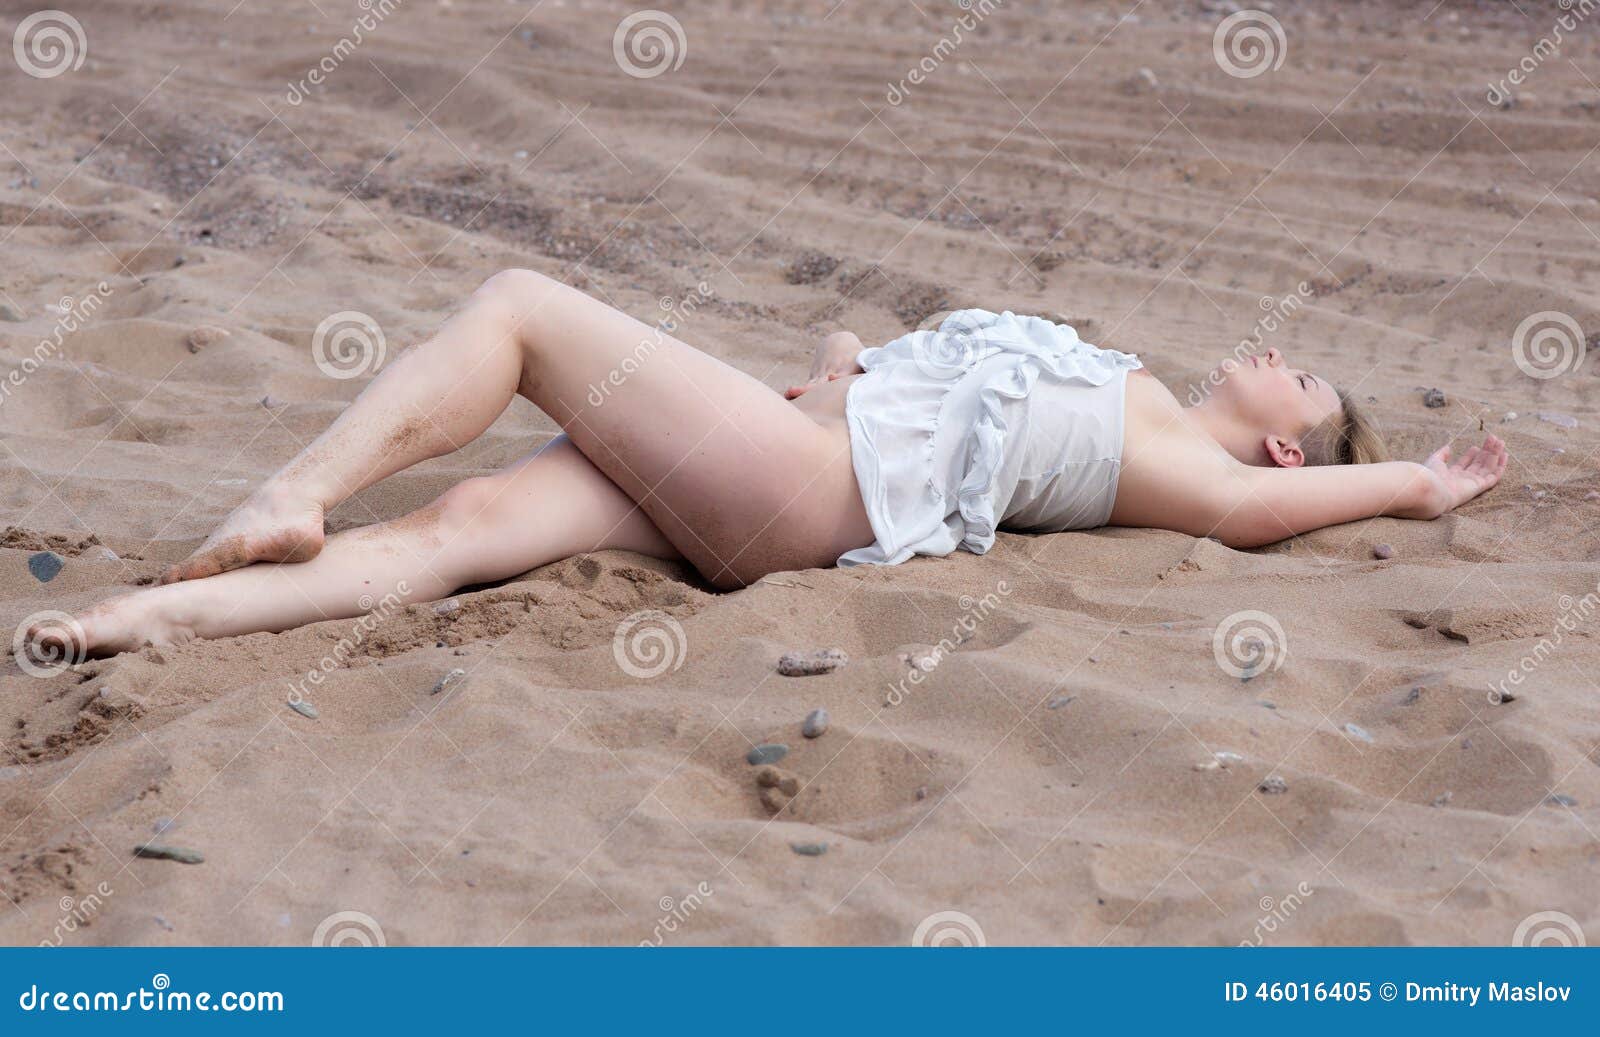 stock photo rest sand nude woman